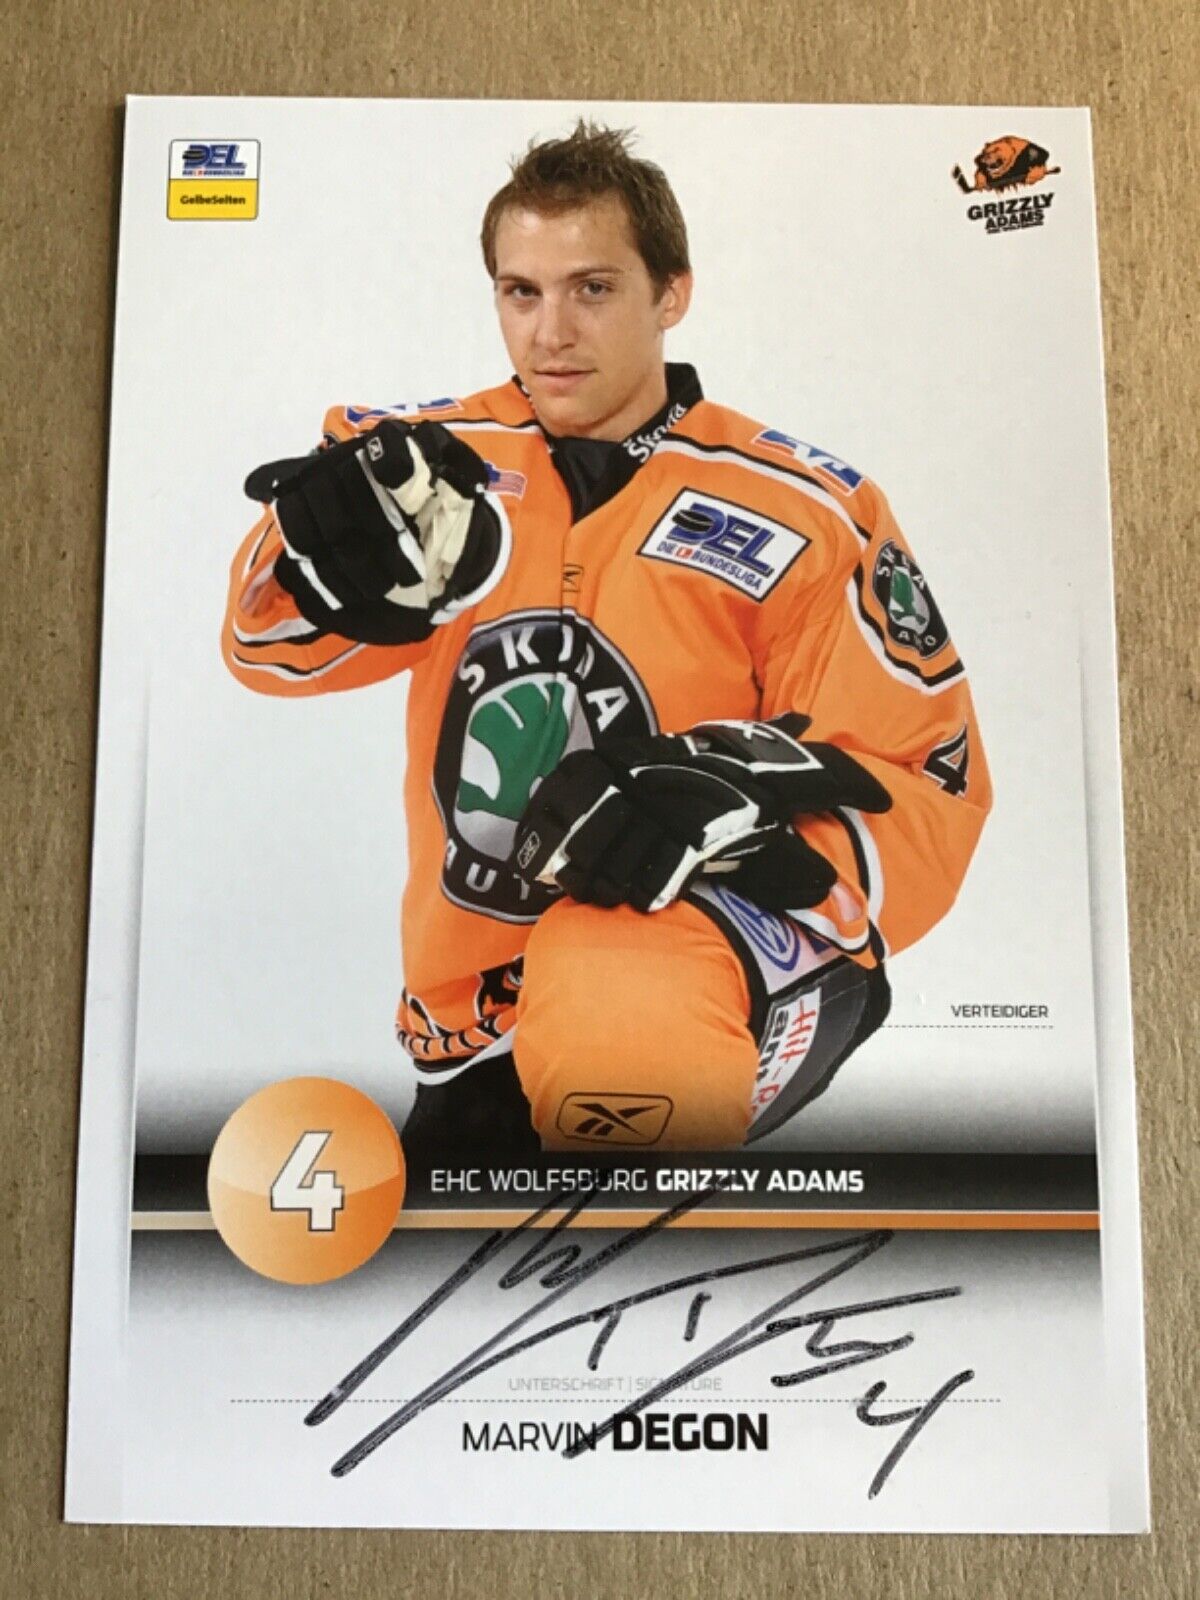 Marvin Degon, USA 🇺🇸 Hockey Grizzly Wolfsburg 2008/09 hand signed